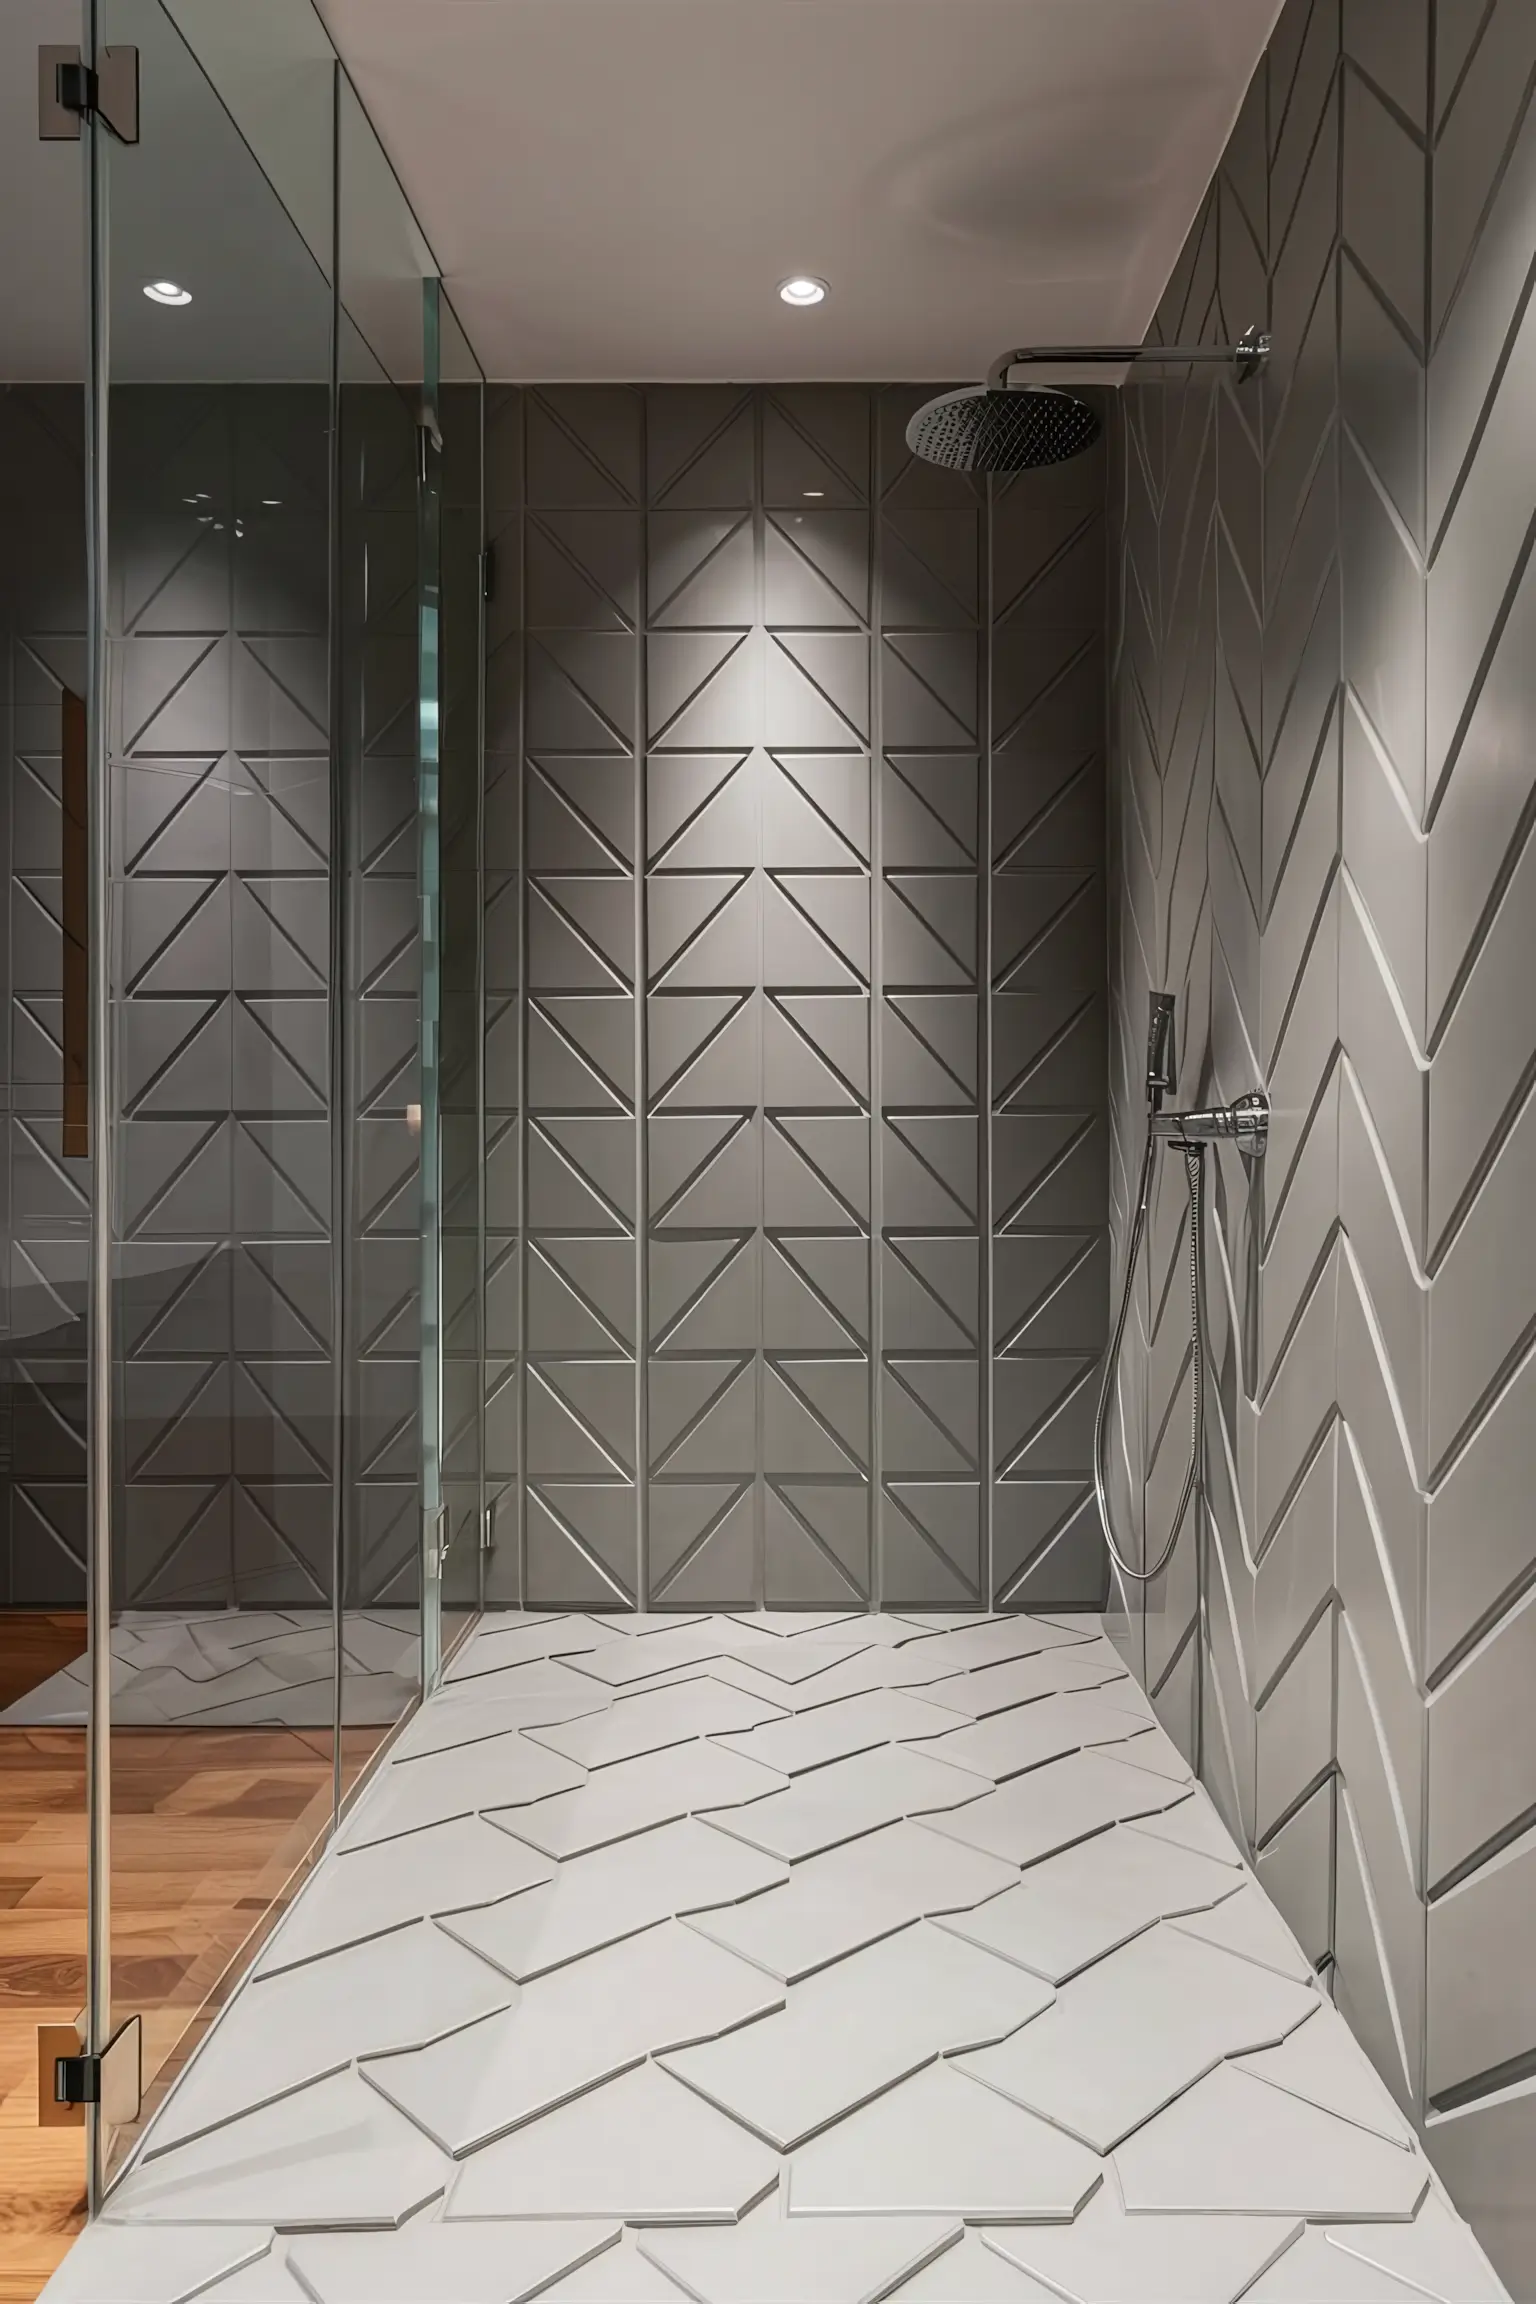 Bathroom with coordinated floor and shower tiles creating a seamless look